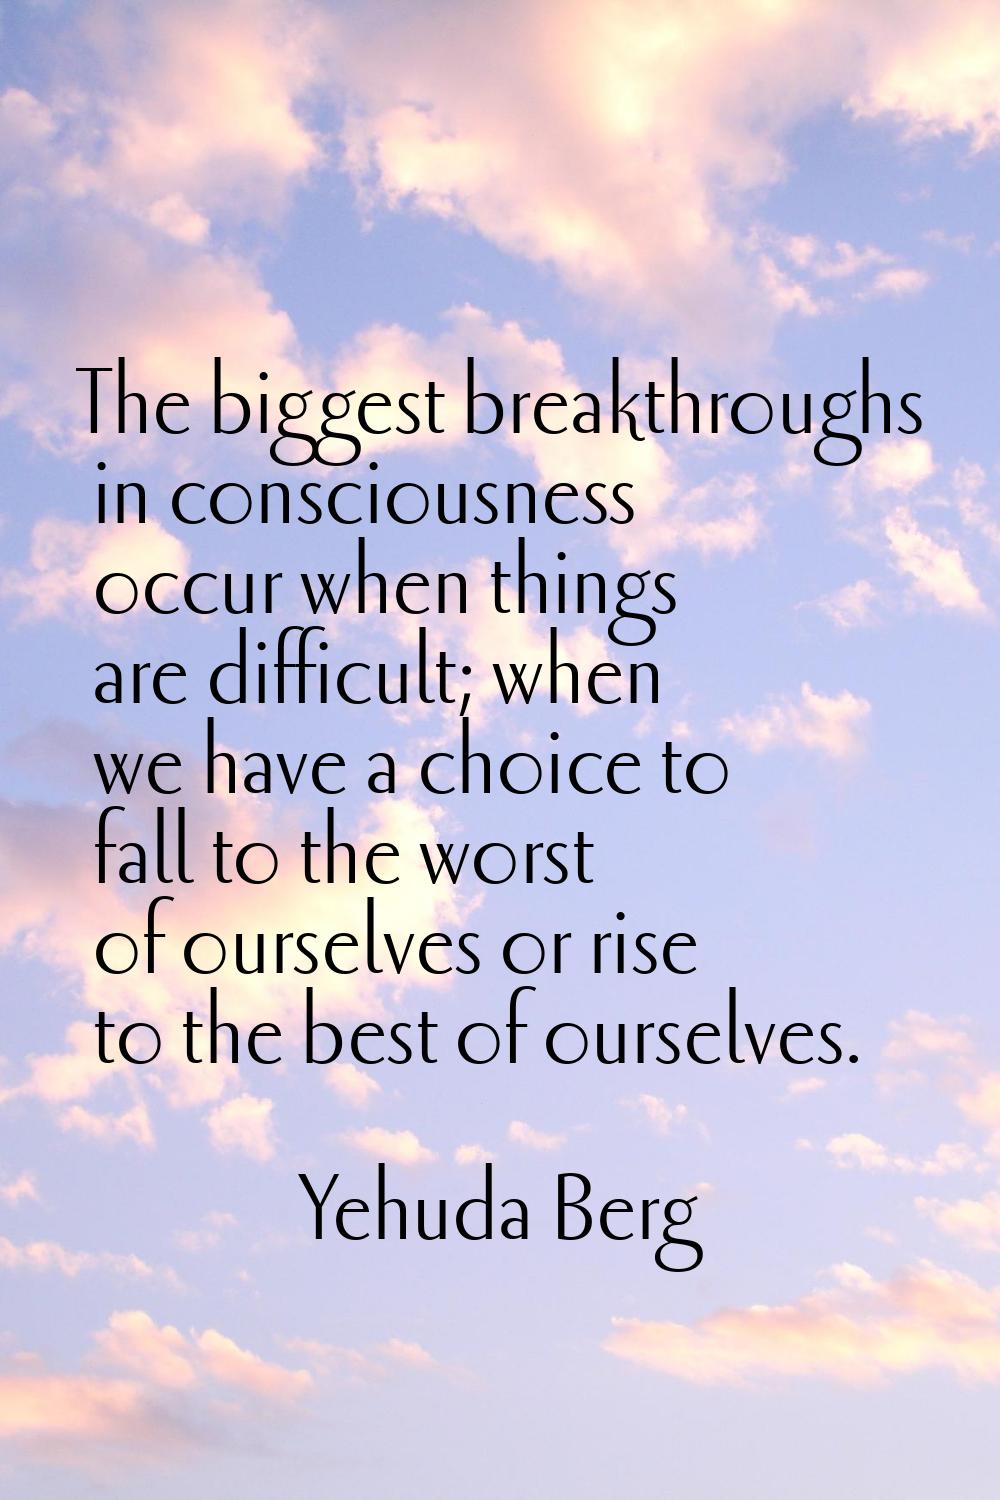 The biggest breakthroughs in consciousness occur when things are difficult; when we have a choice t